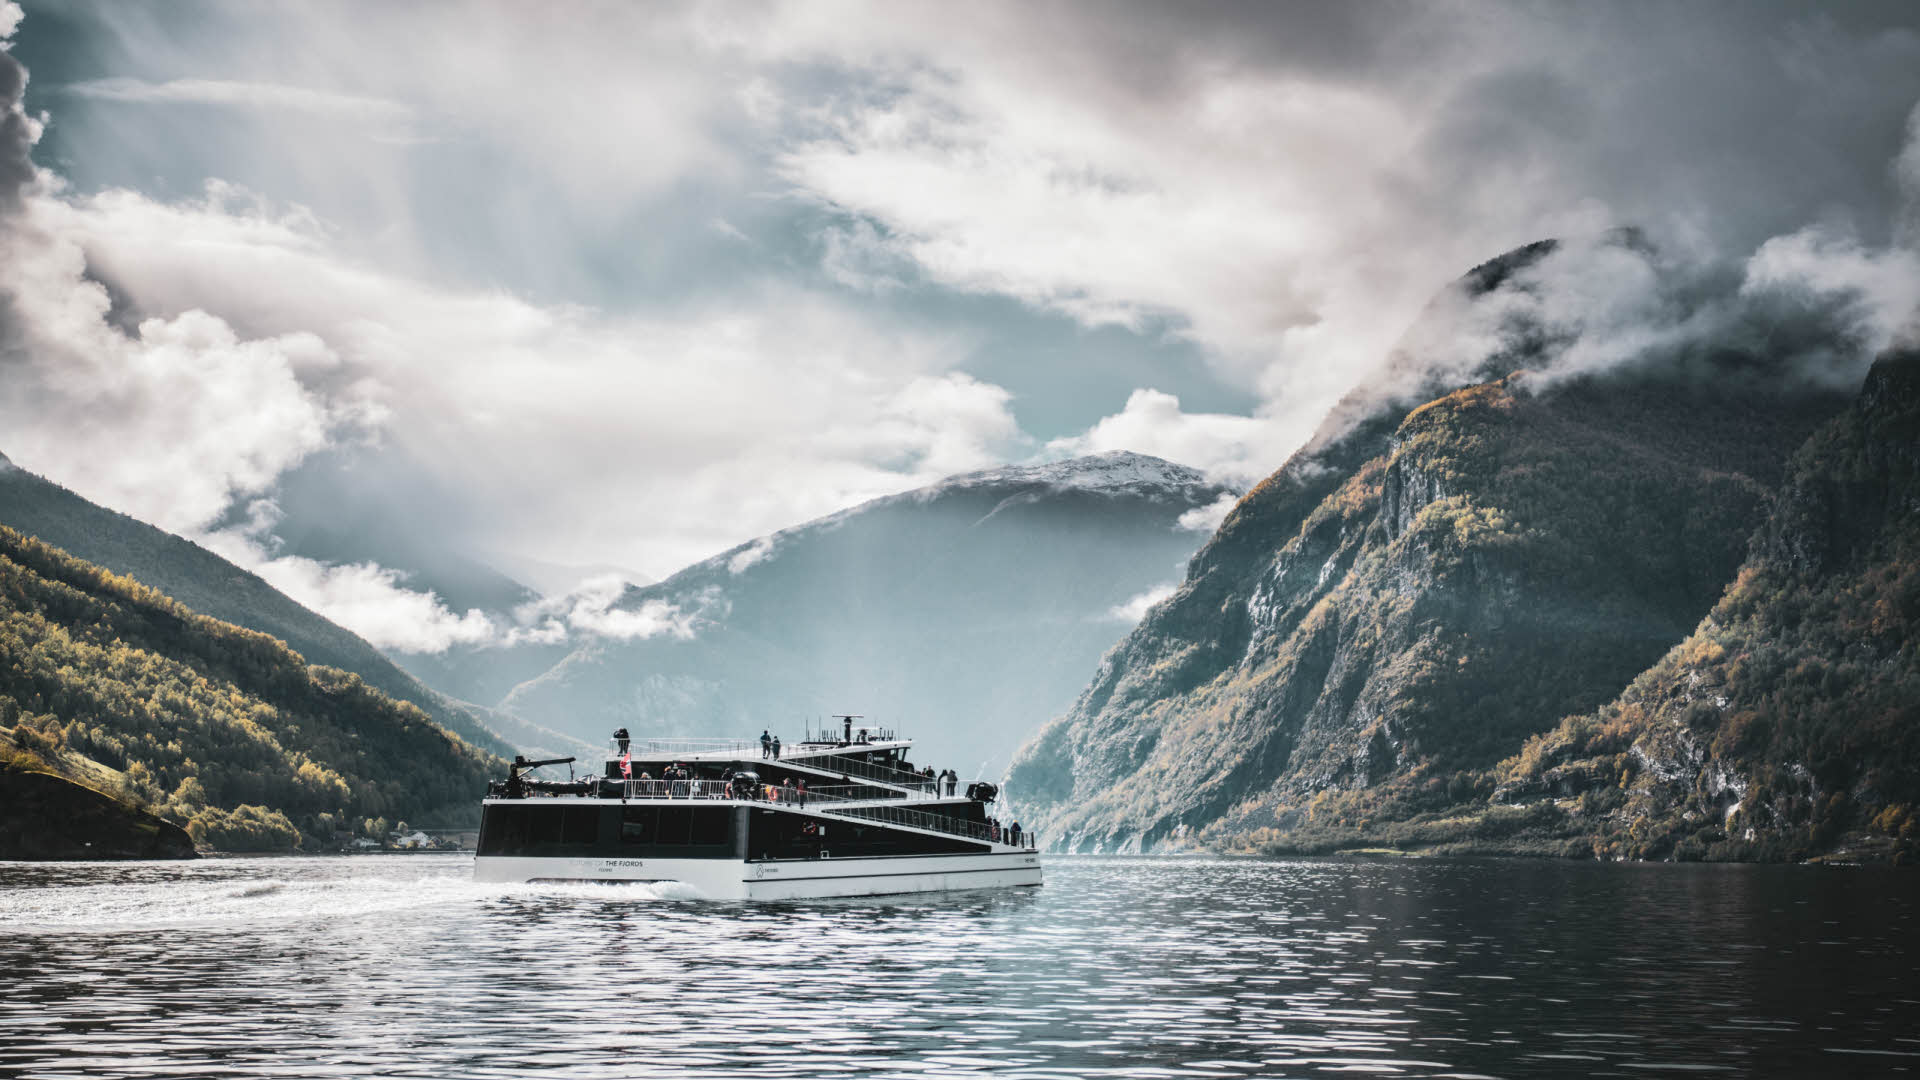 The electric vessel Future of The Fjords sailing through the calm UNESCO listed Naeroyfjord on a sunny autumn day